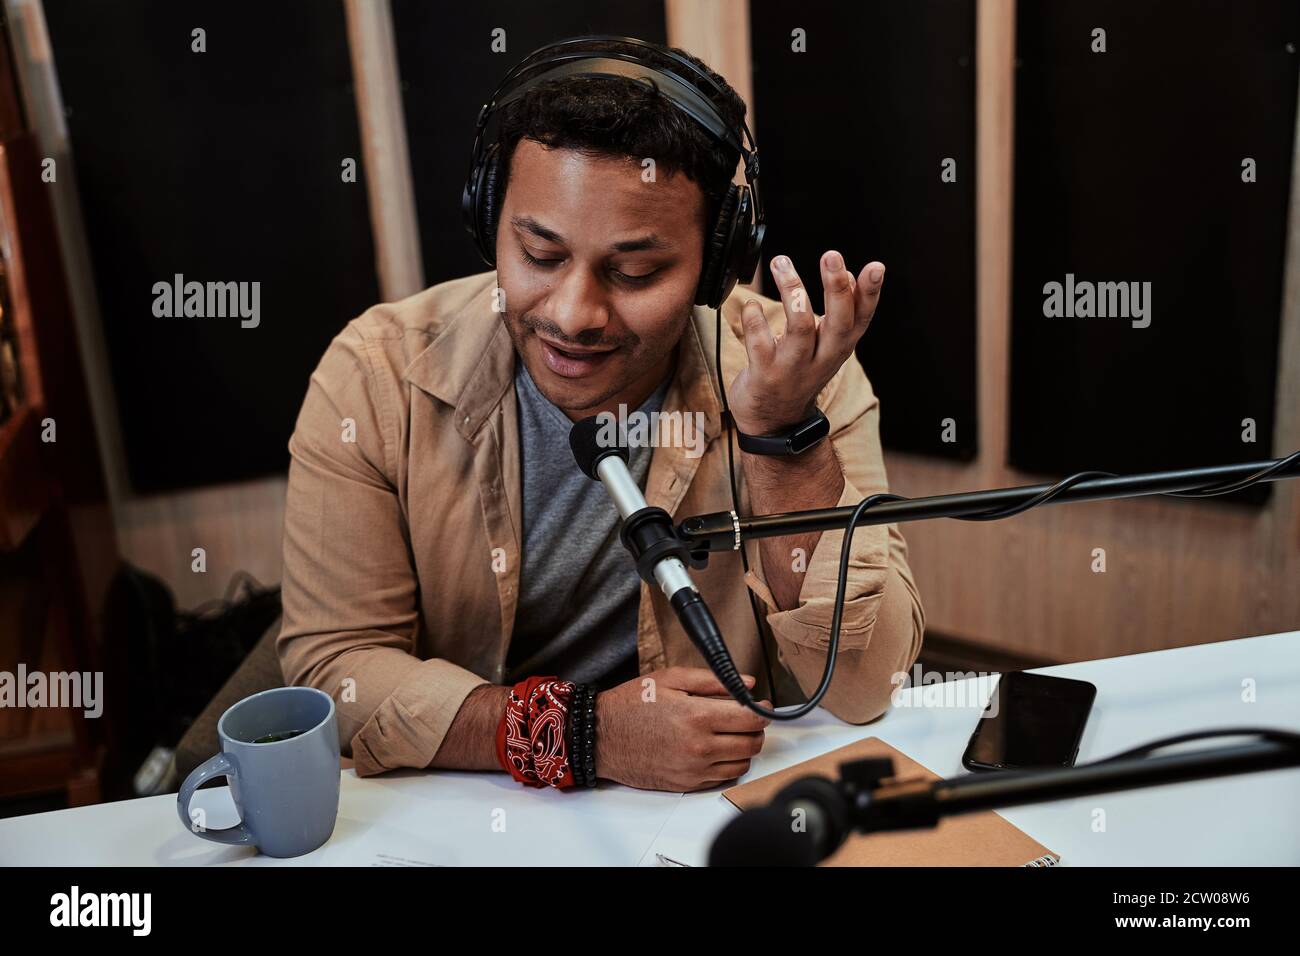 Happy young male radio host talking, broadcasting in studio using microphone and headphones Stock Photo